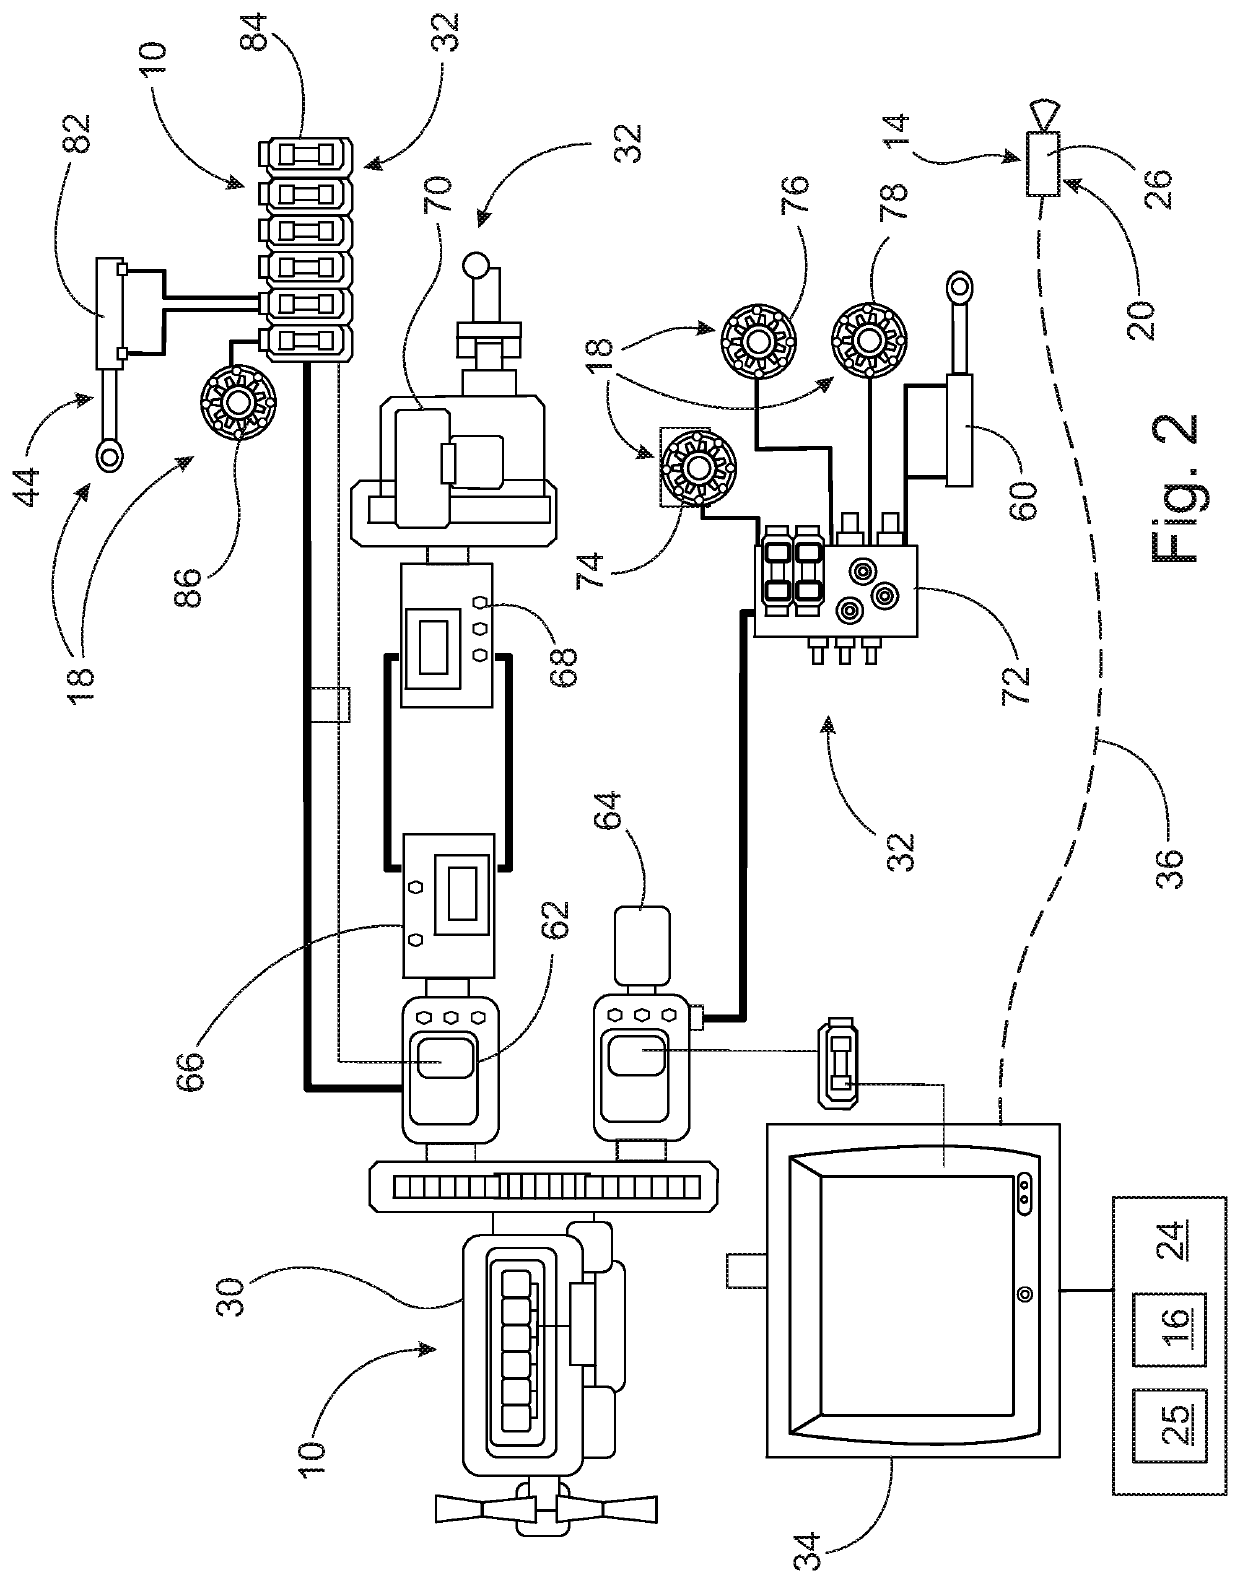 Method for controlling power-transmission gear, system, and forest machine